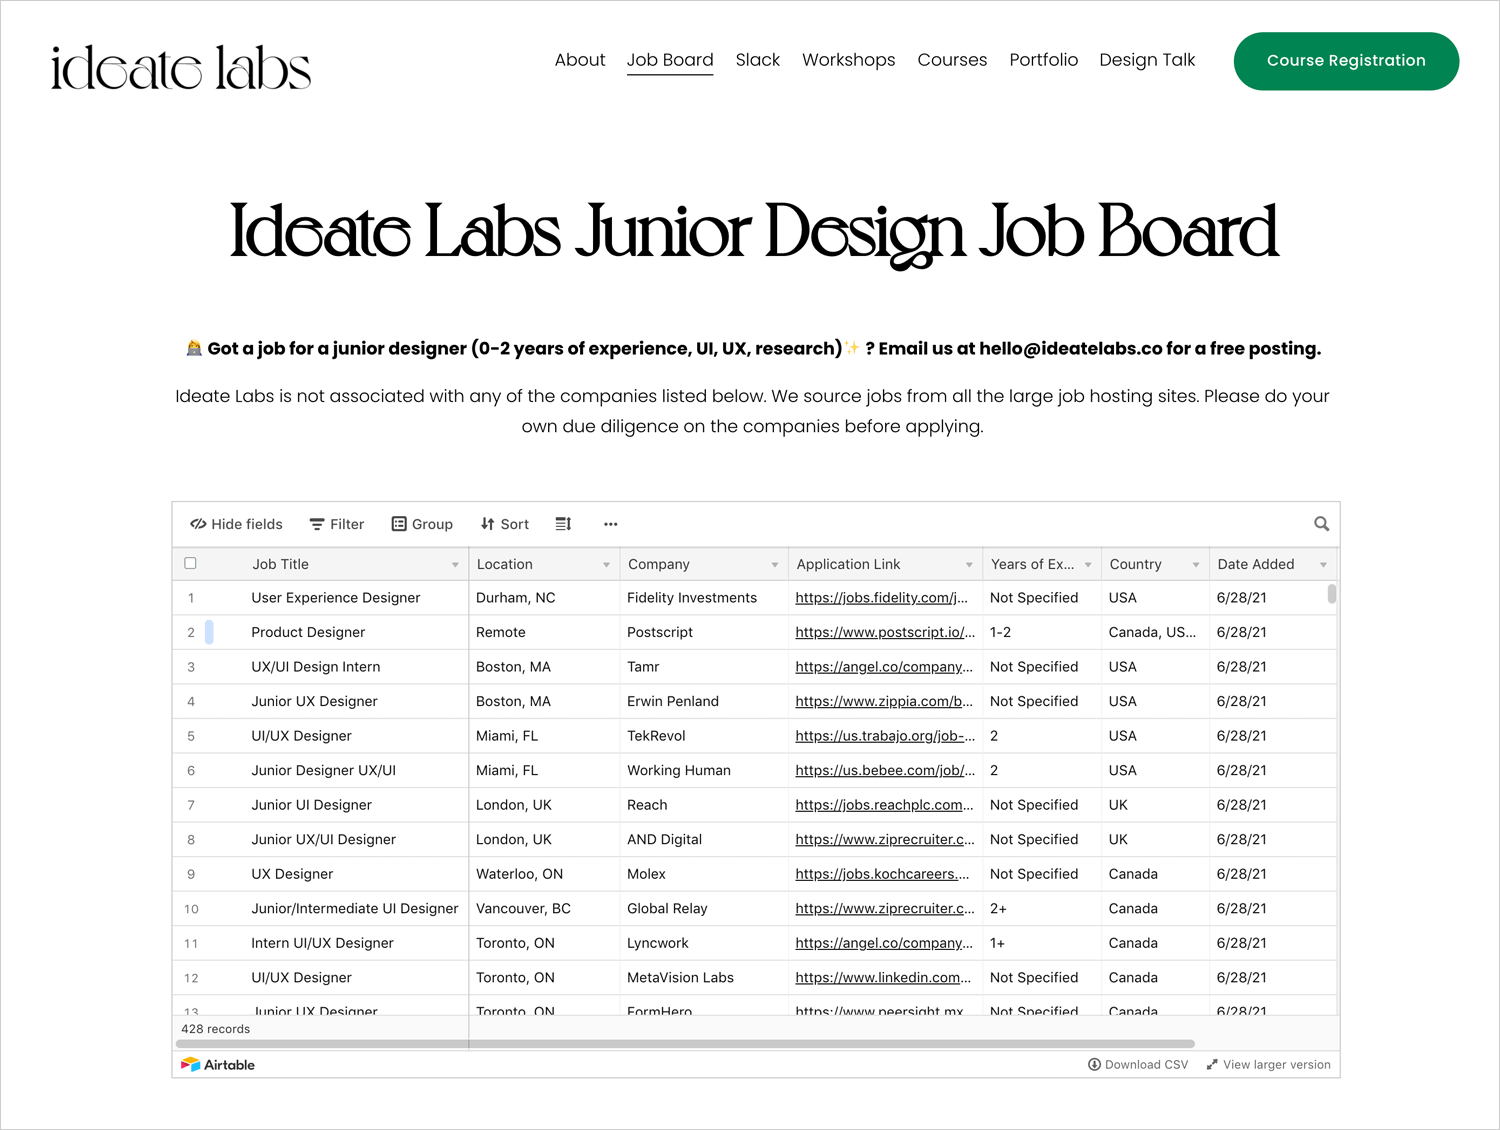 ideate labs as place for ux design jobs and internships